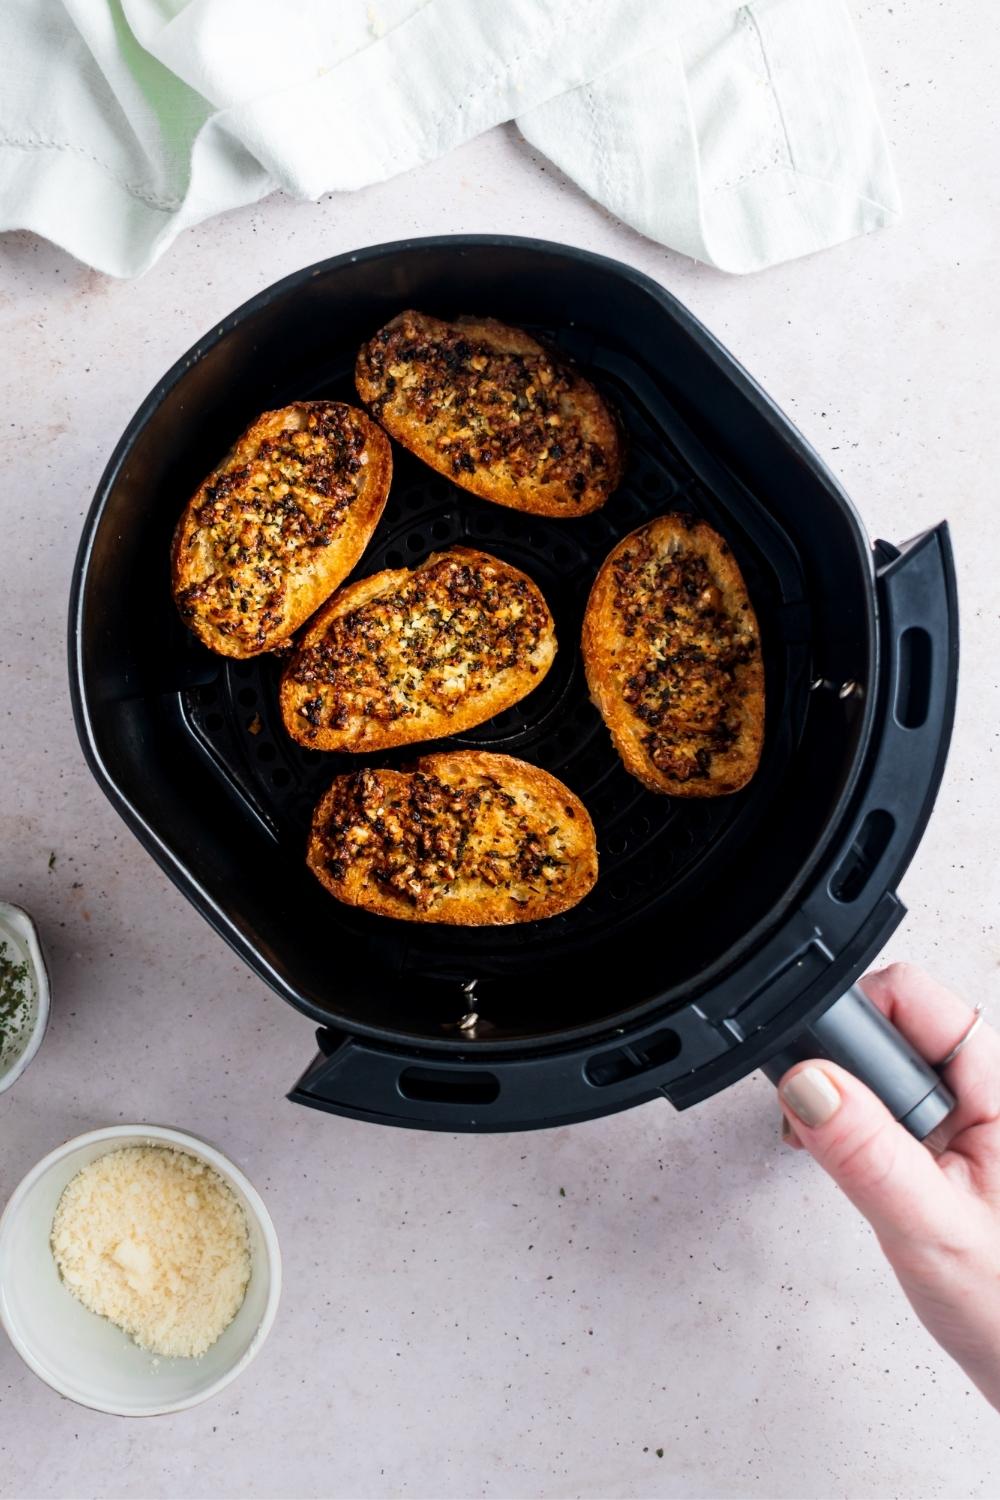 Five pieces of cooked garlic bread in an air fryer basket.